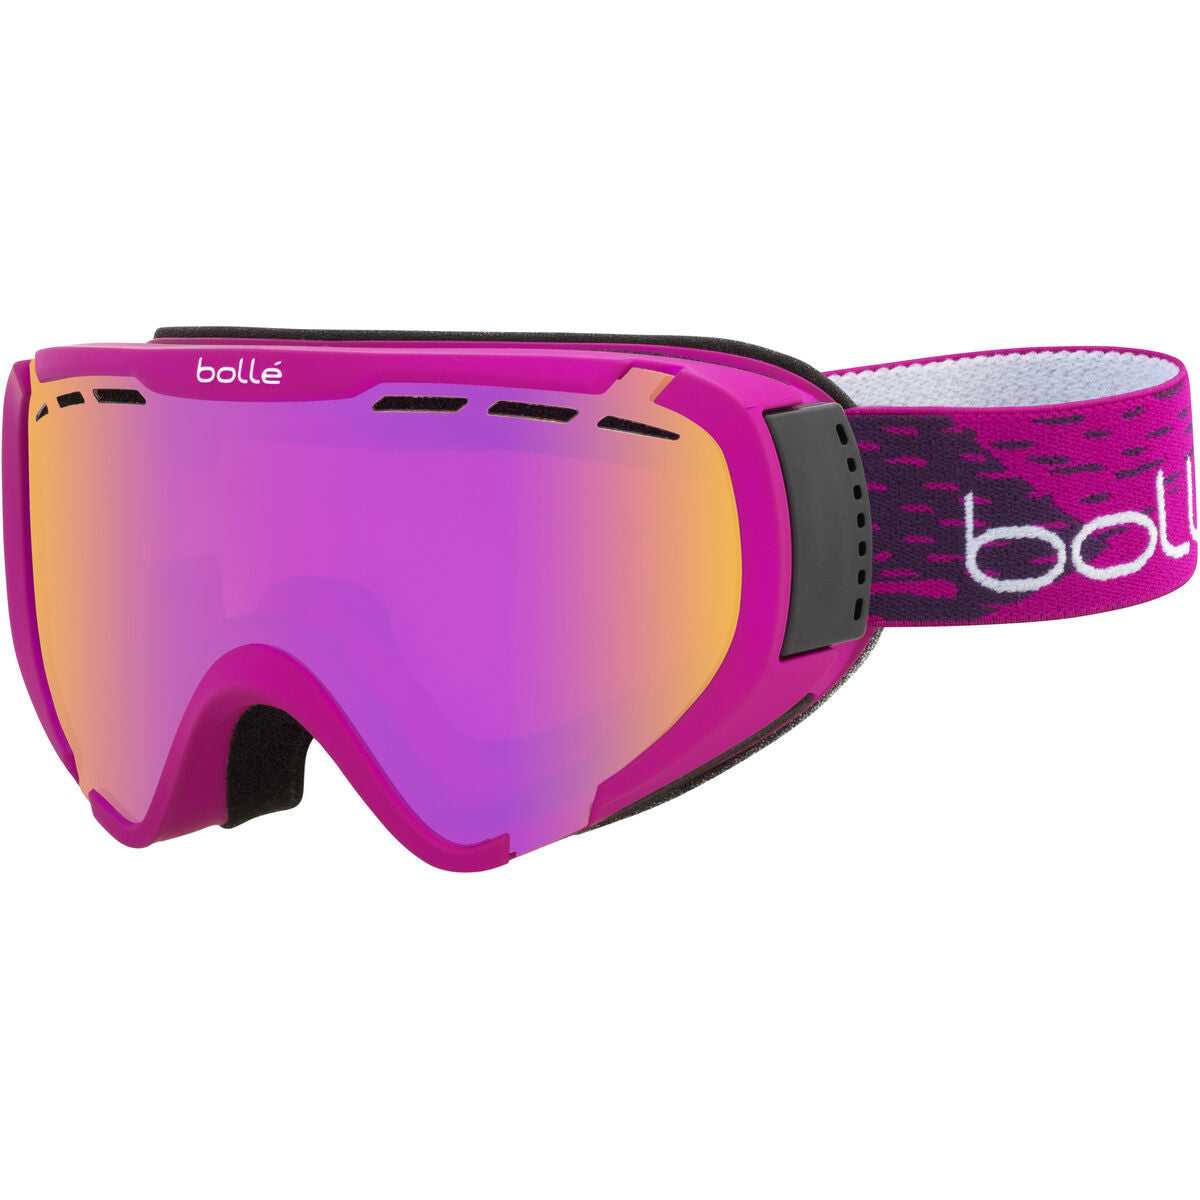 Bolle Explorer Otg Bolle Winter Goggle  Matte Pink Rose Gold One Size